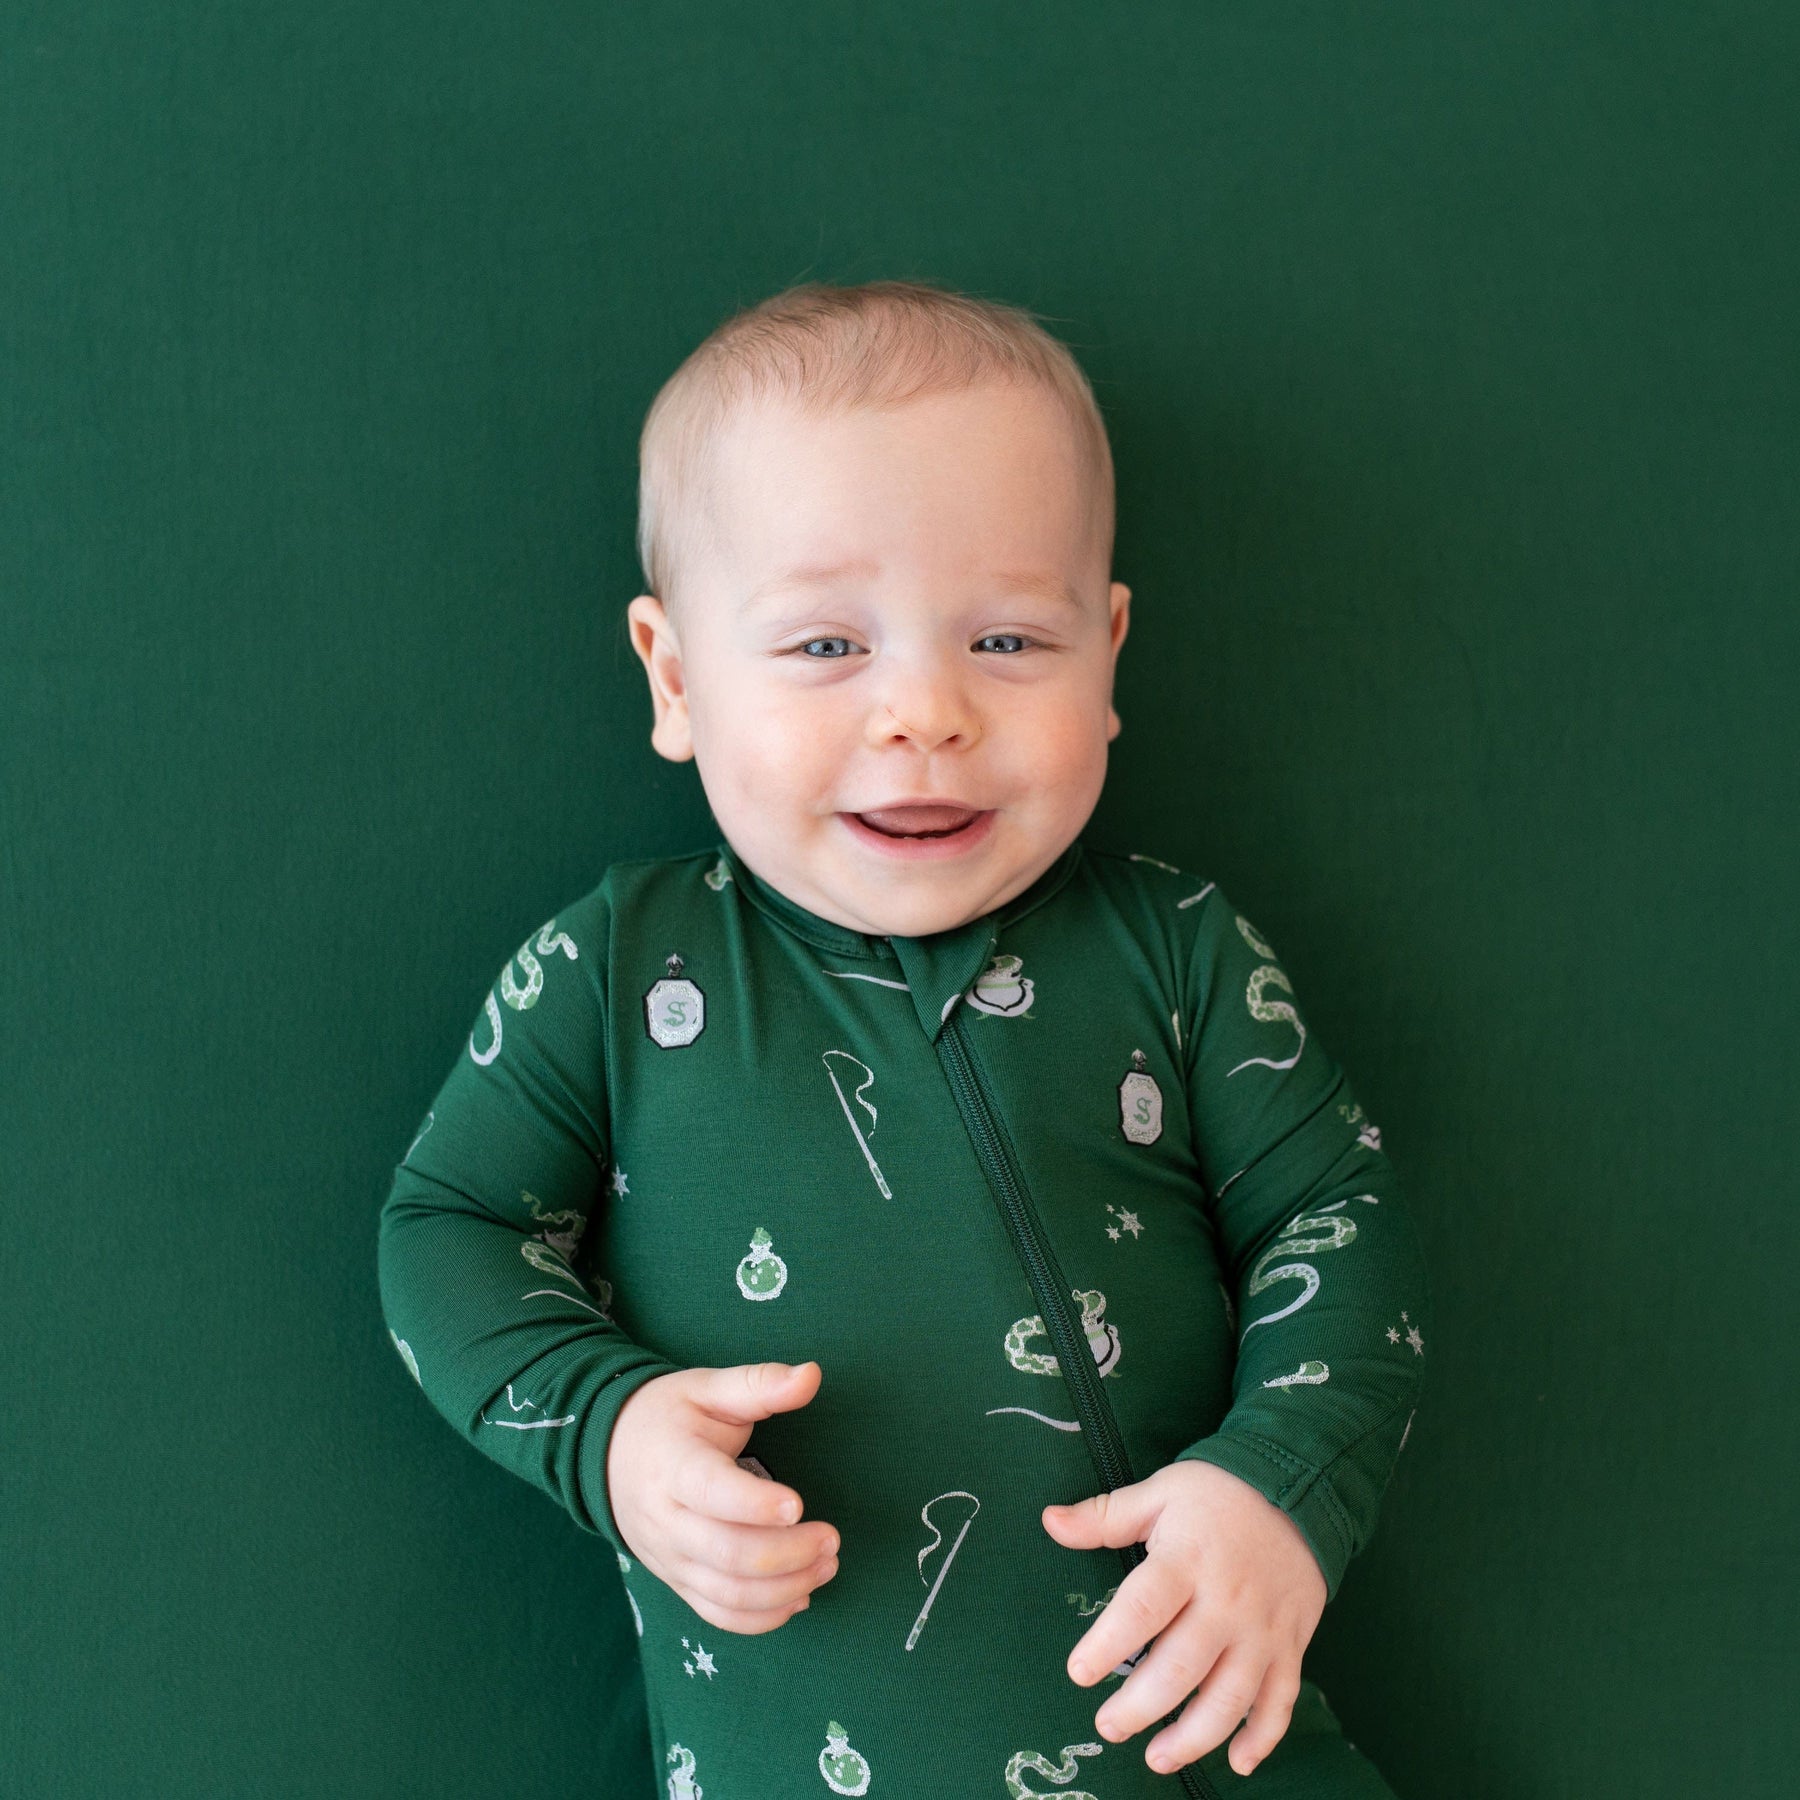 Kyte Baby Zippered Rompers Zippered Romper in Slytherin™